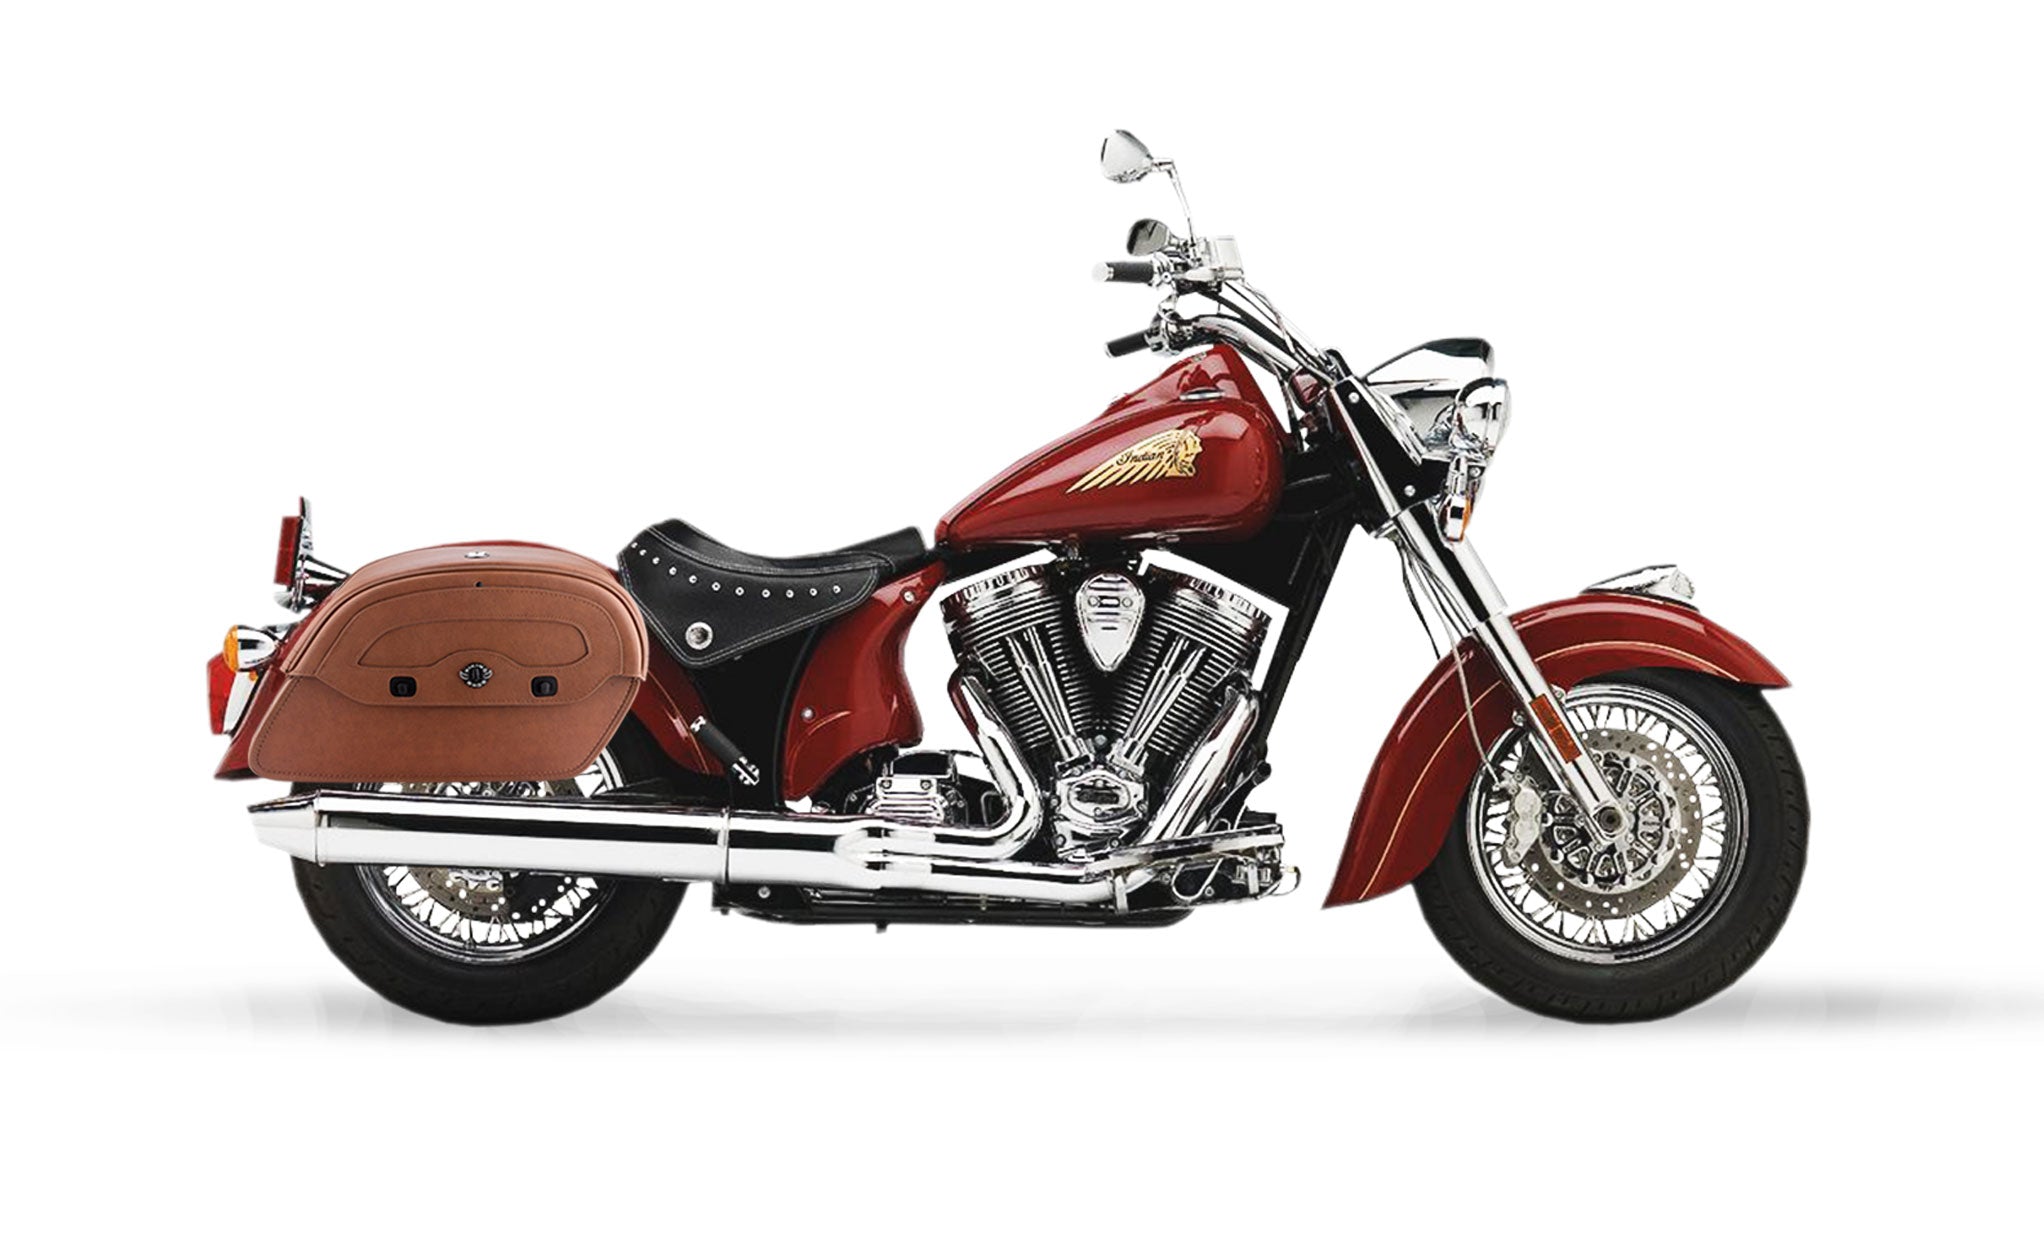 Viking Warrior Brown Large Indian Chief Standard Leather Motorcycle Saddlebags on Bike Photo @expand